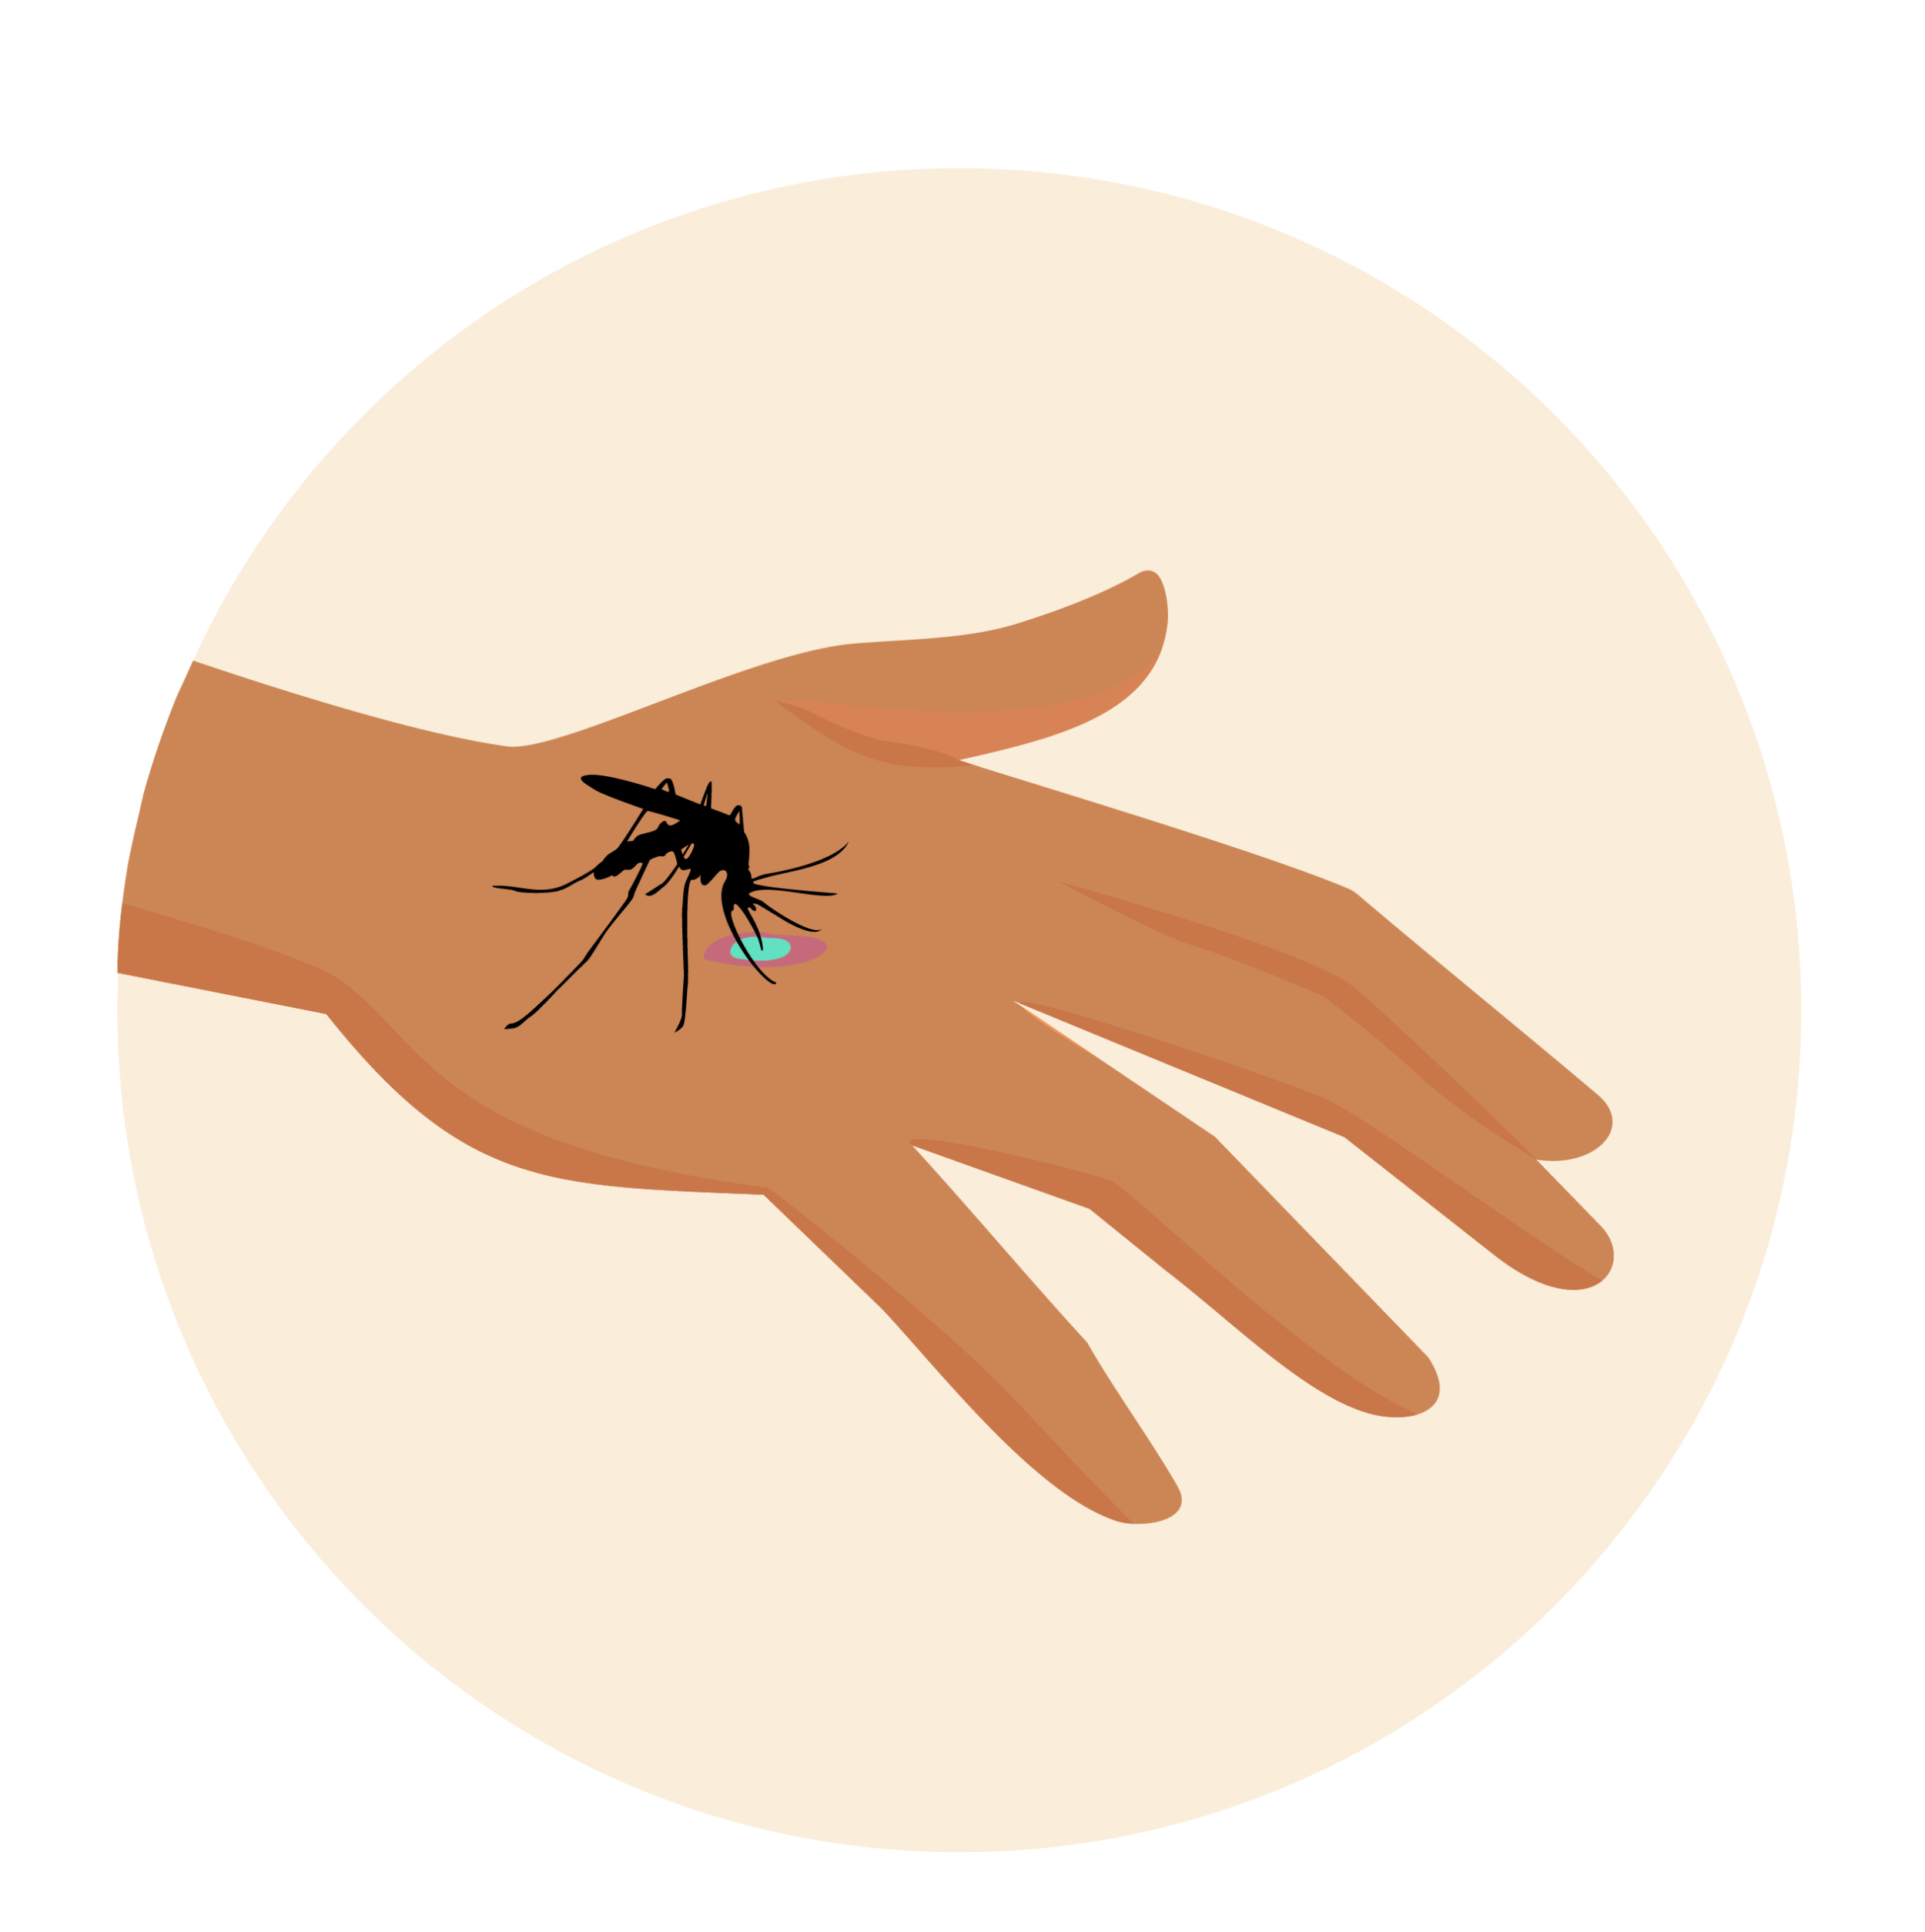 Uninfected mosquito biting a hand with malaria infected blood. 